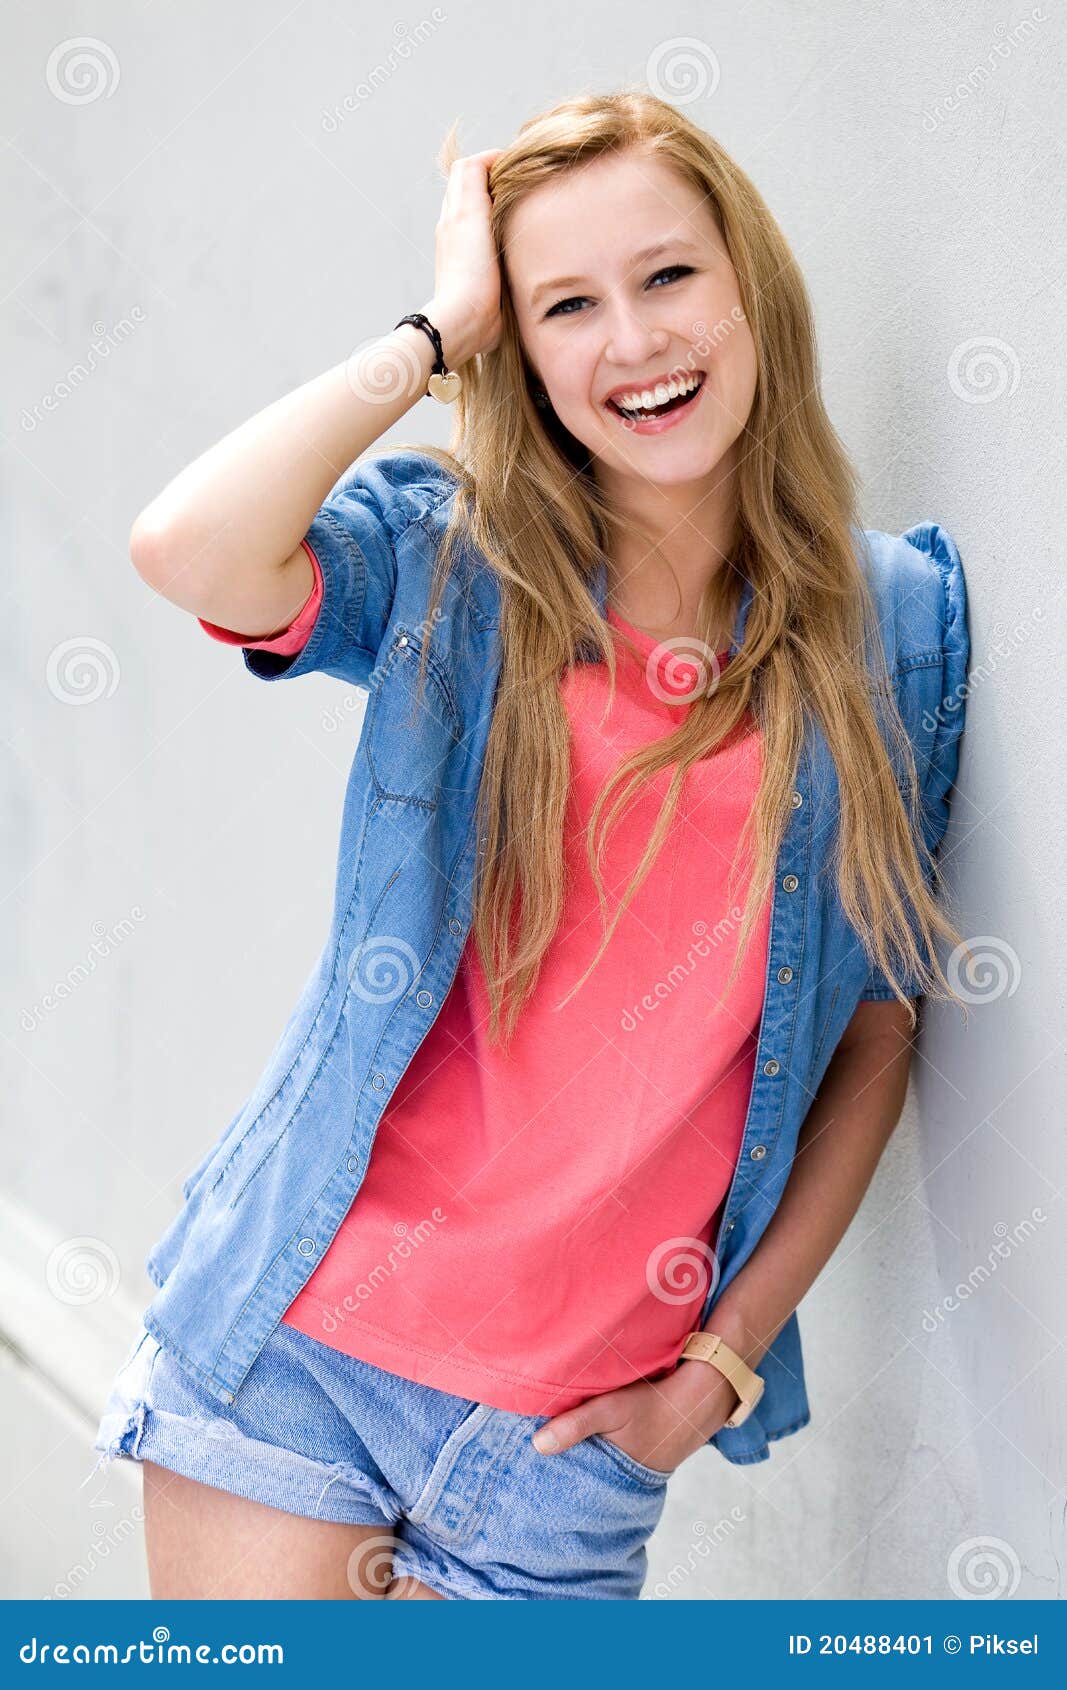 Young Woman Leaning Against Wall Stock Image - Image of girl, wall ...